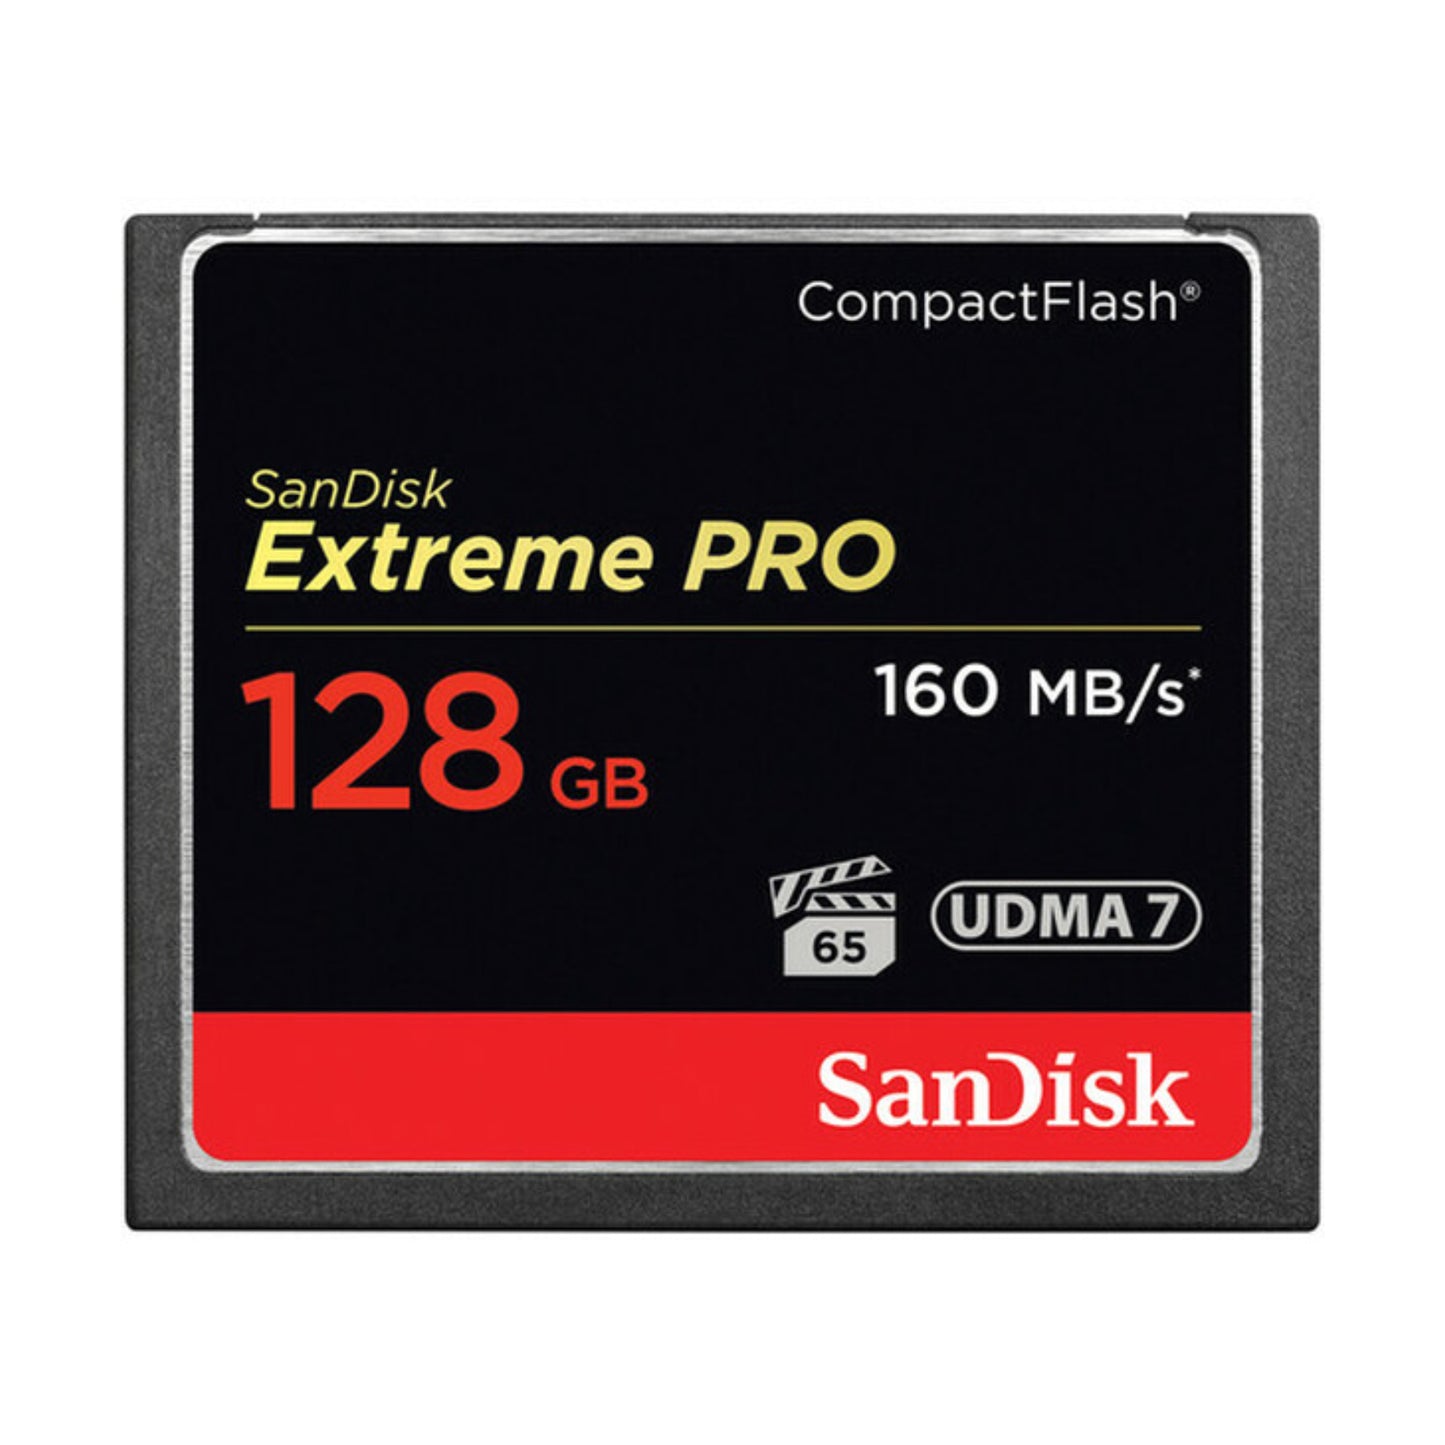 Sandisk Extreme Pro 160Mb/s CF Card (Select Size)